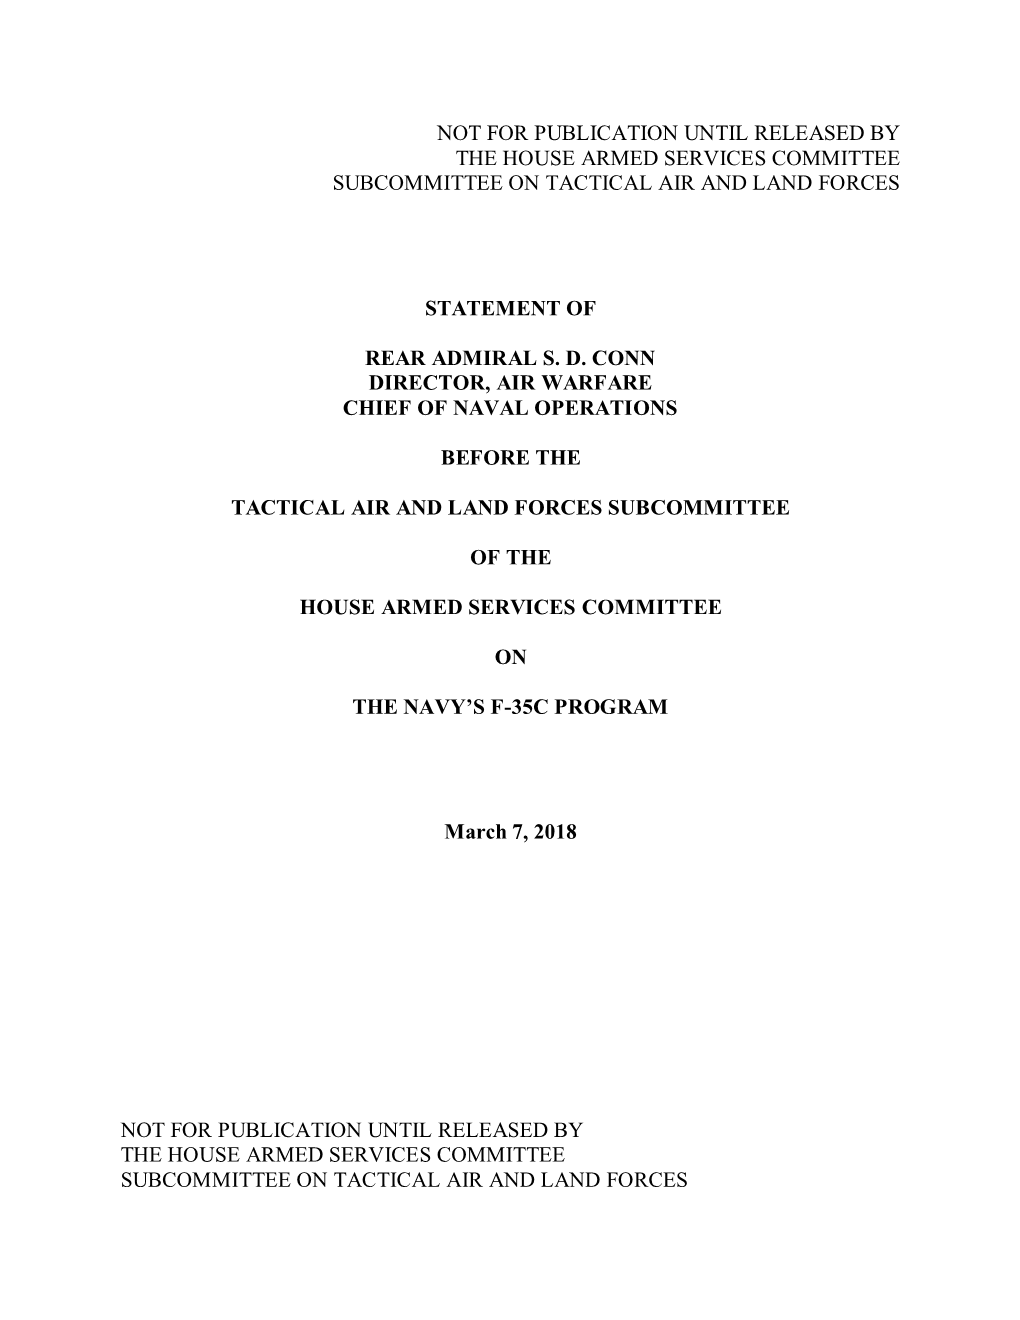 Not for Publication Until Released by the House Armed Services Committee Subcommittee on Tactical Air and Land Forces